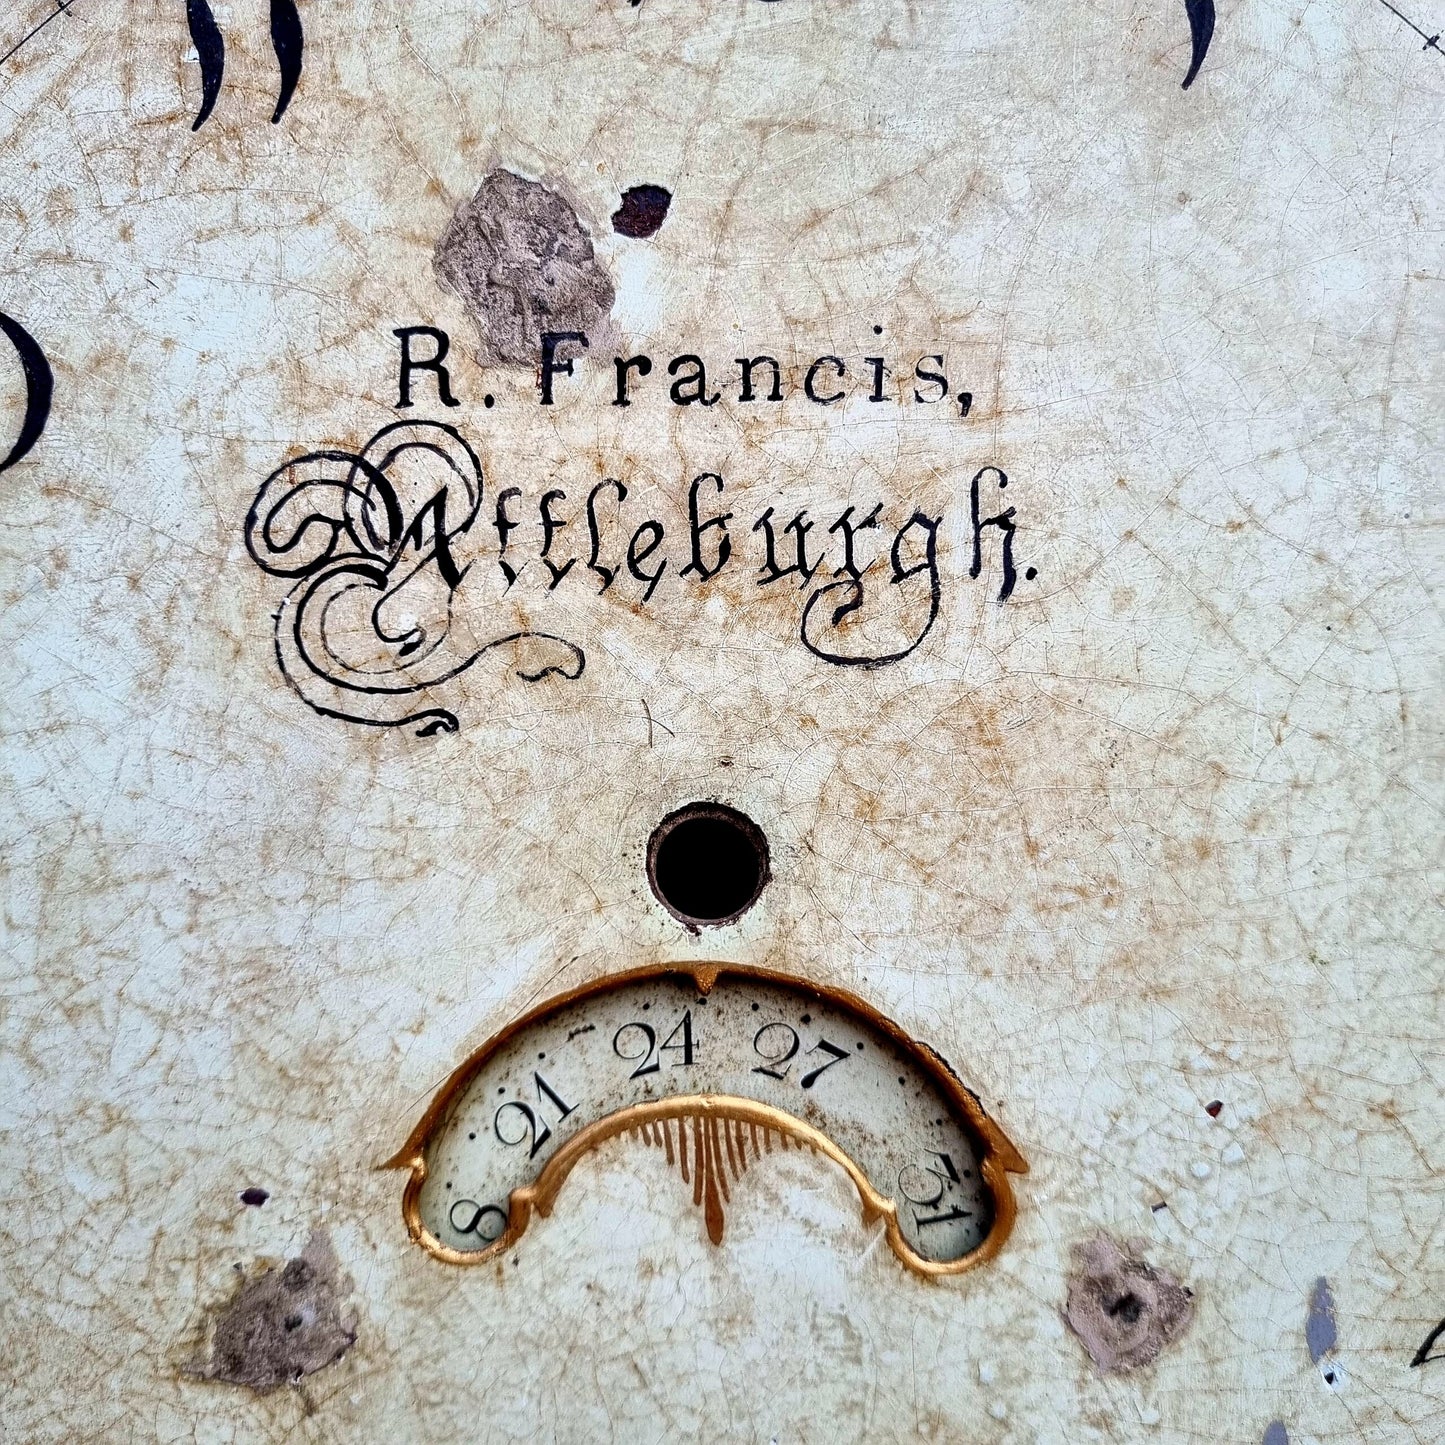 Early 19thC George III Period English Antique Painted Clock Dial, Signed "R Francis, Attleborough"